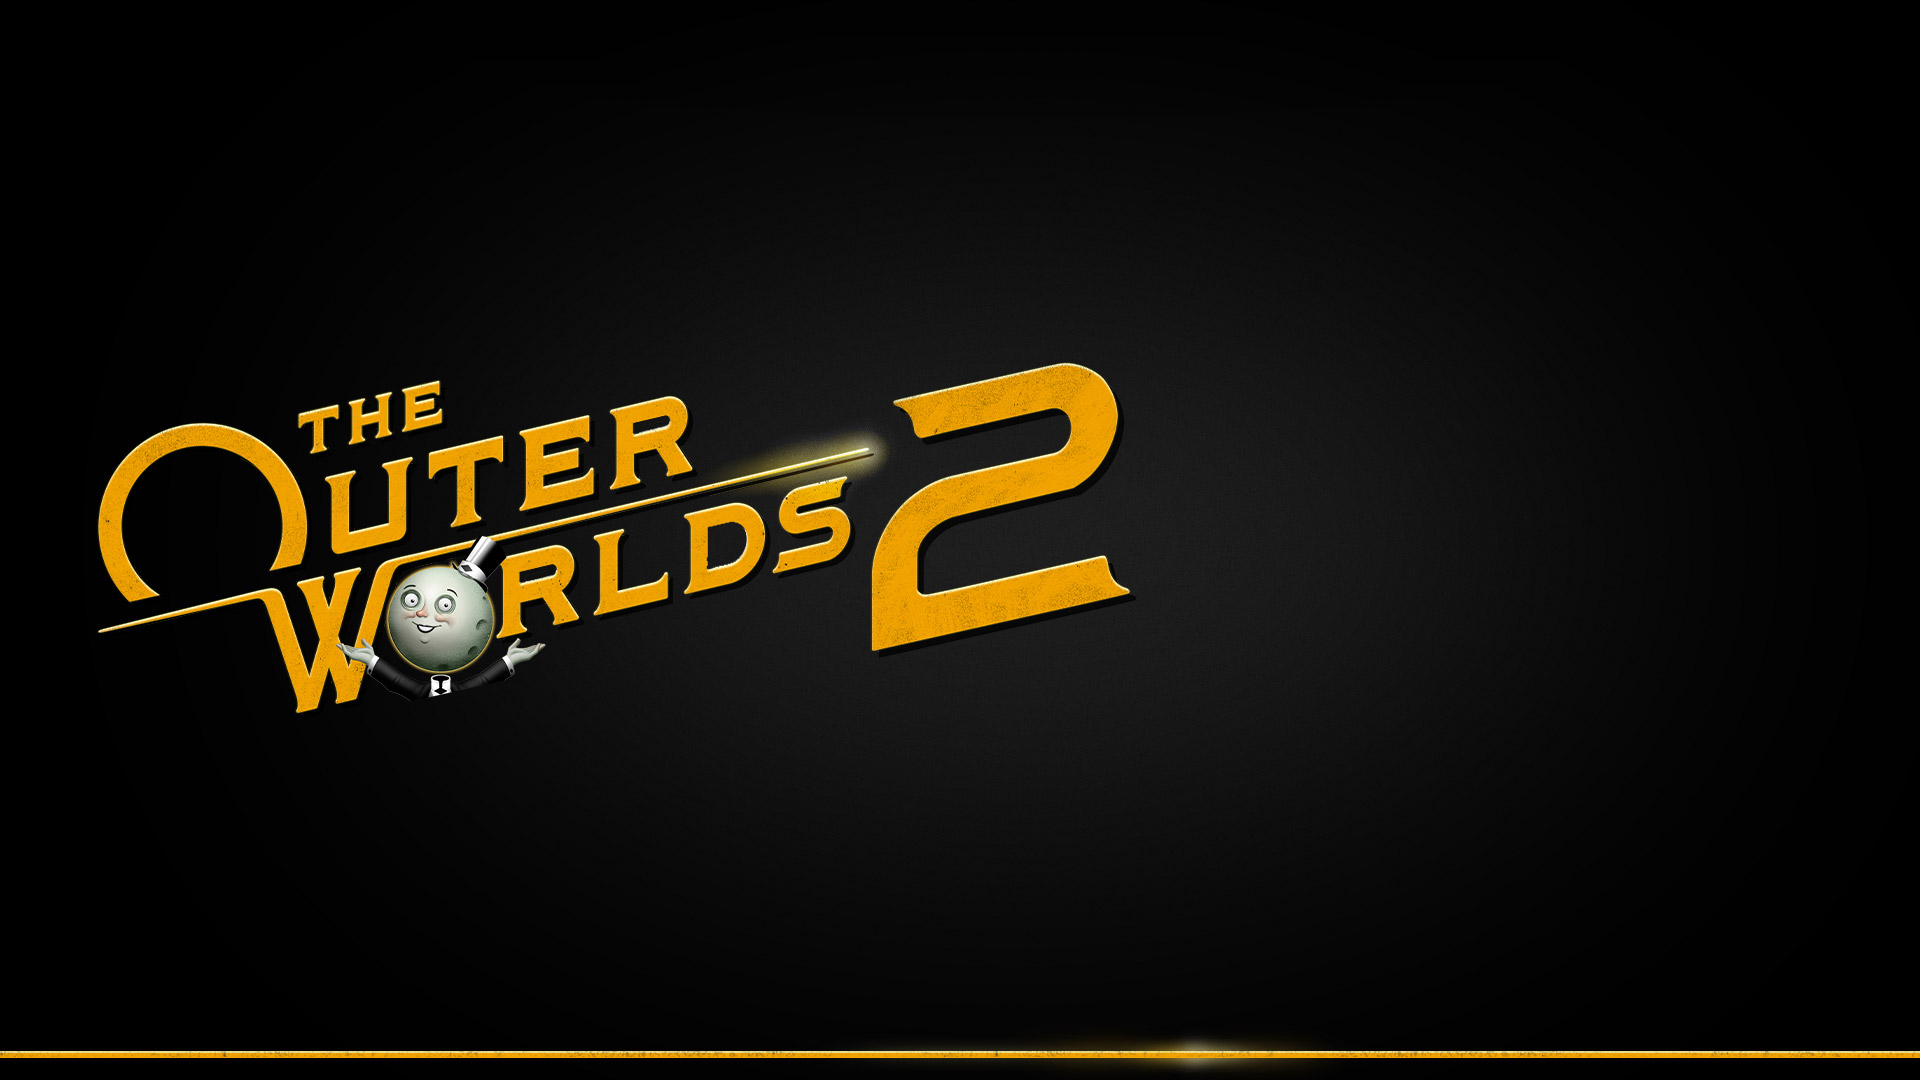 Логотип The Outer Worlds 2